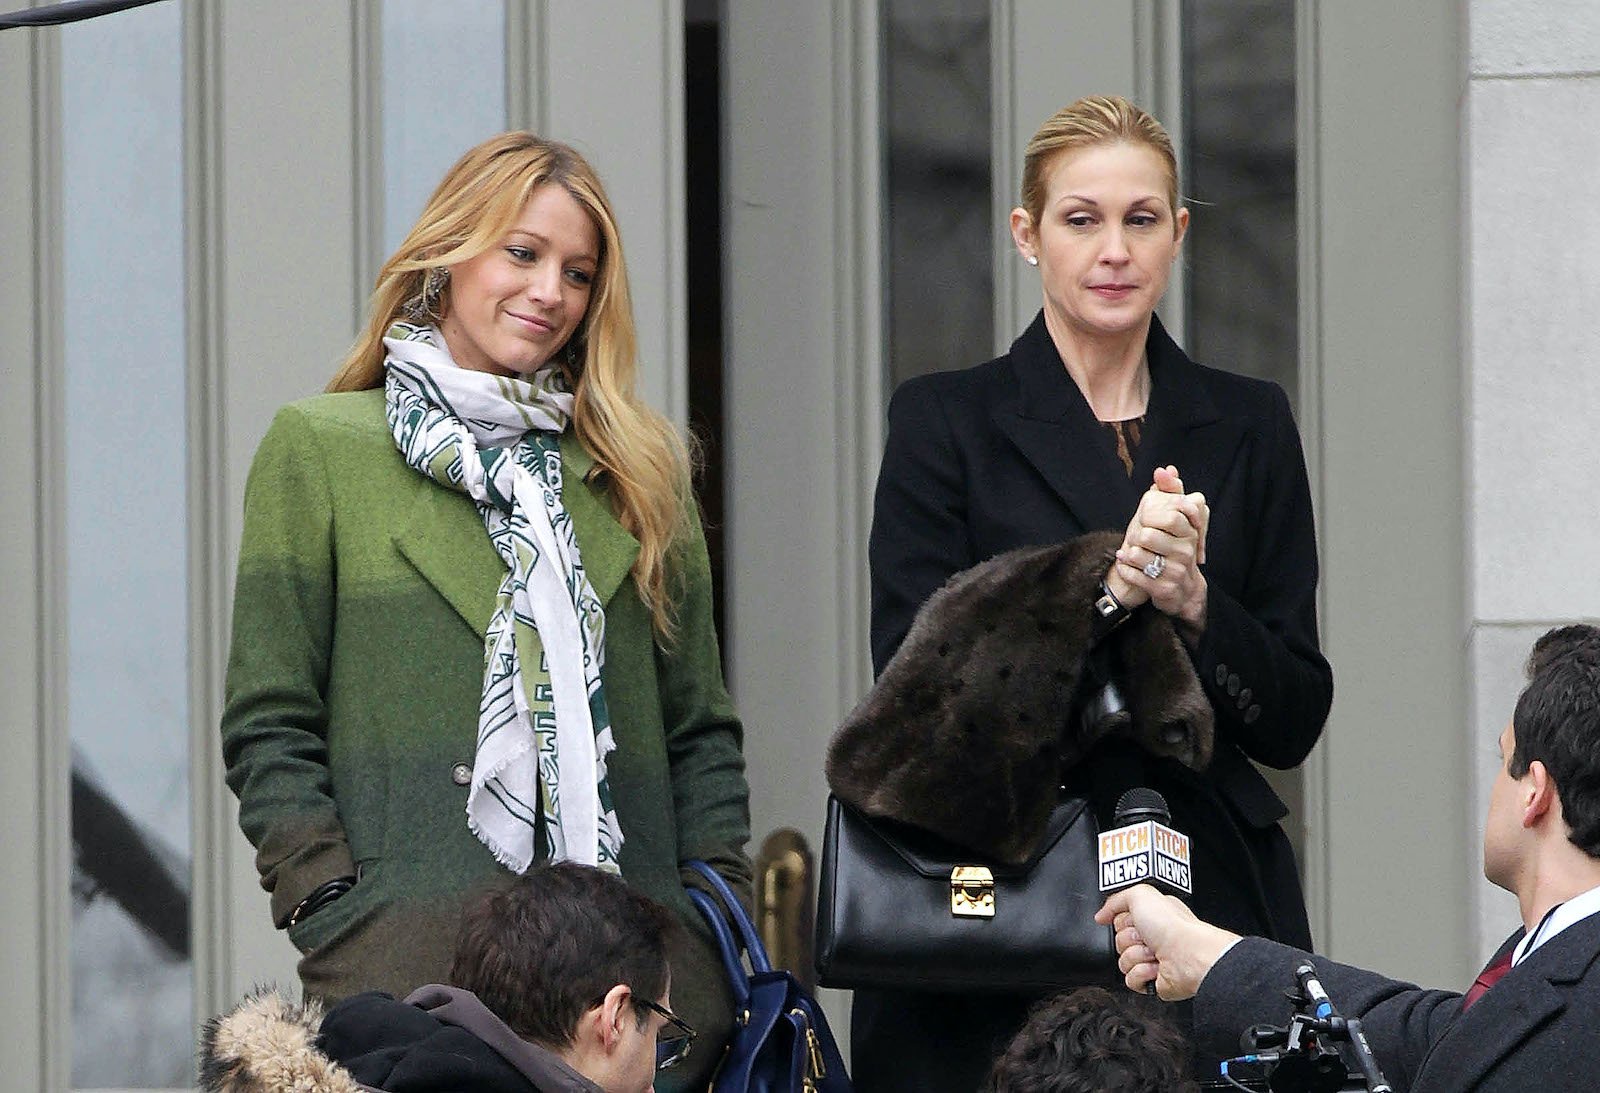 Blake Lively and Kelly Rutherford from 'Gossip Girl' on set and answering reporters' questions in front of a building 